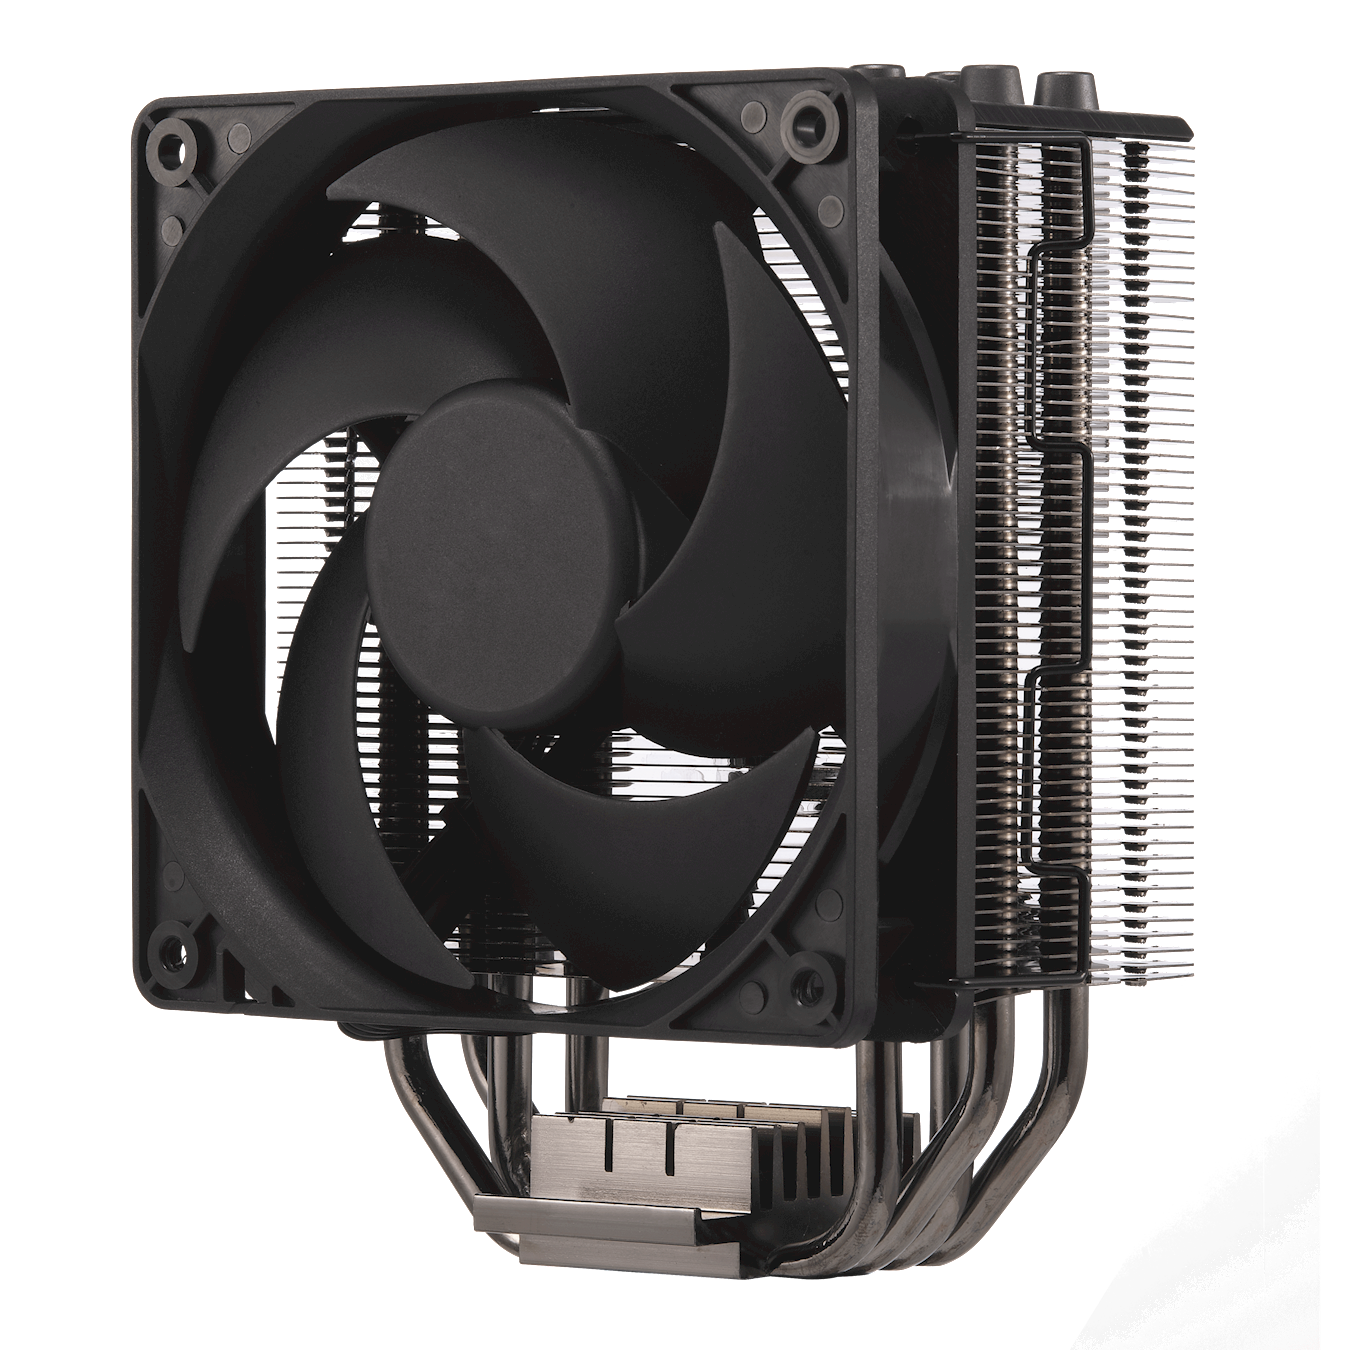 Hyper 212 Black Edition with LGA1700 - The improved universal bracket design ensures easy and worry-free installation on all platforms.